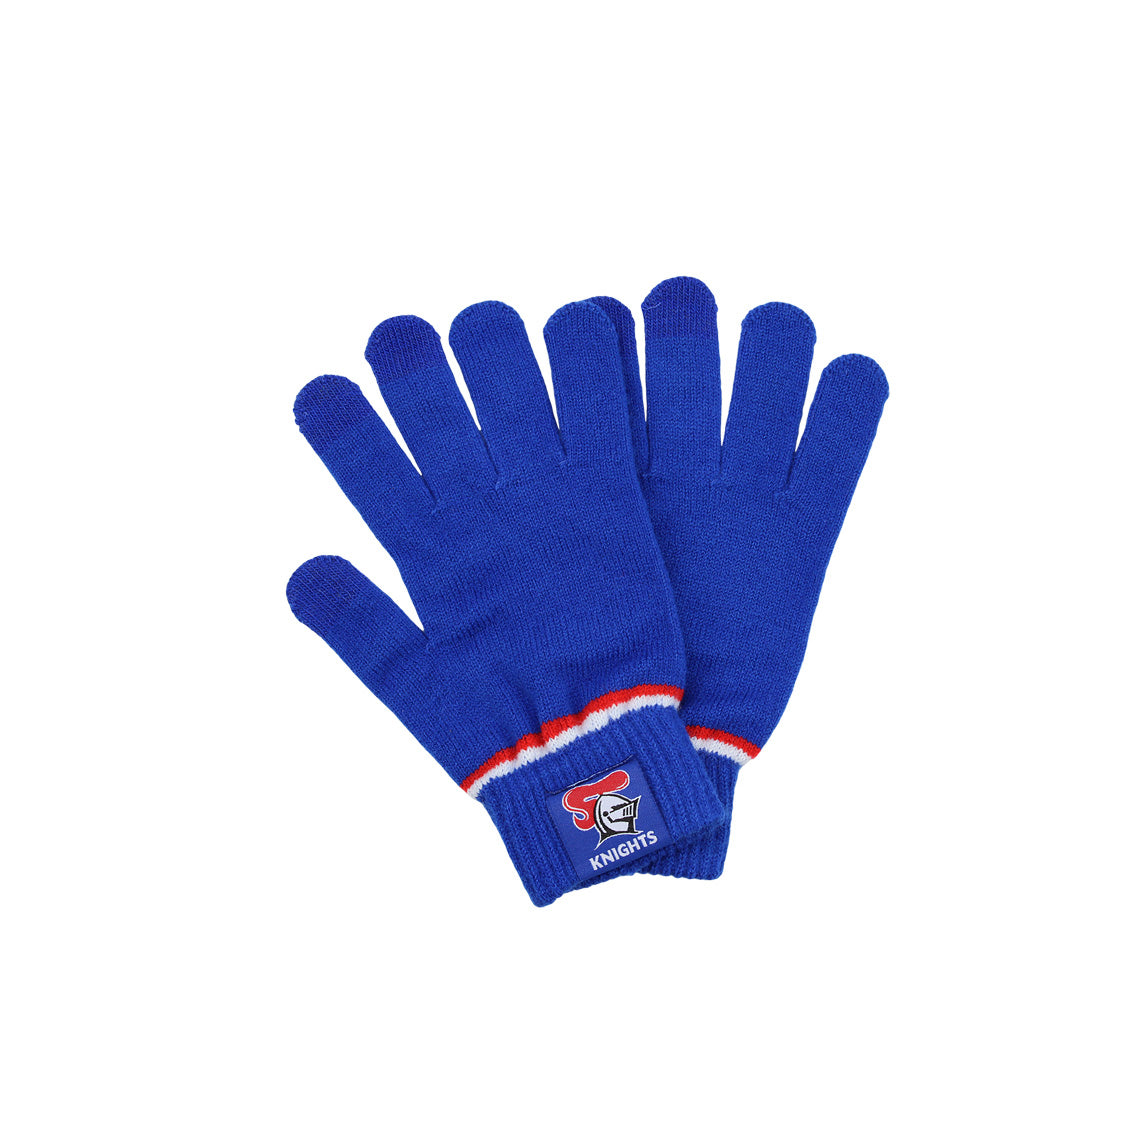 NEW CASTLE KNIGHTS NRL TOUCHSCREEN GLOVES_NEW CASTLE KNIGHTS_STUBBY CLUB